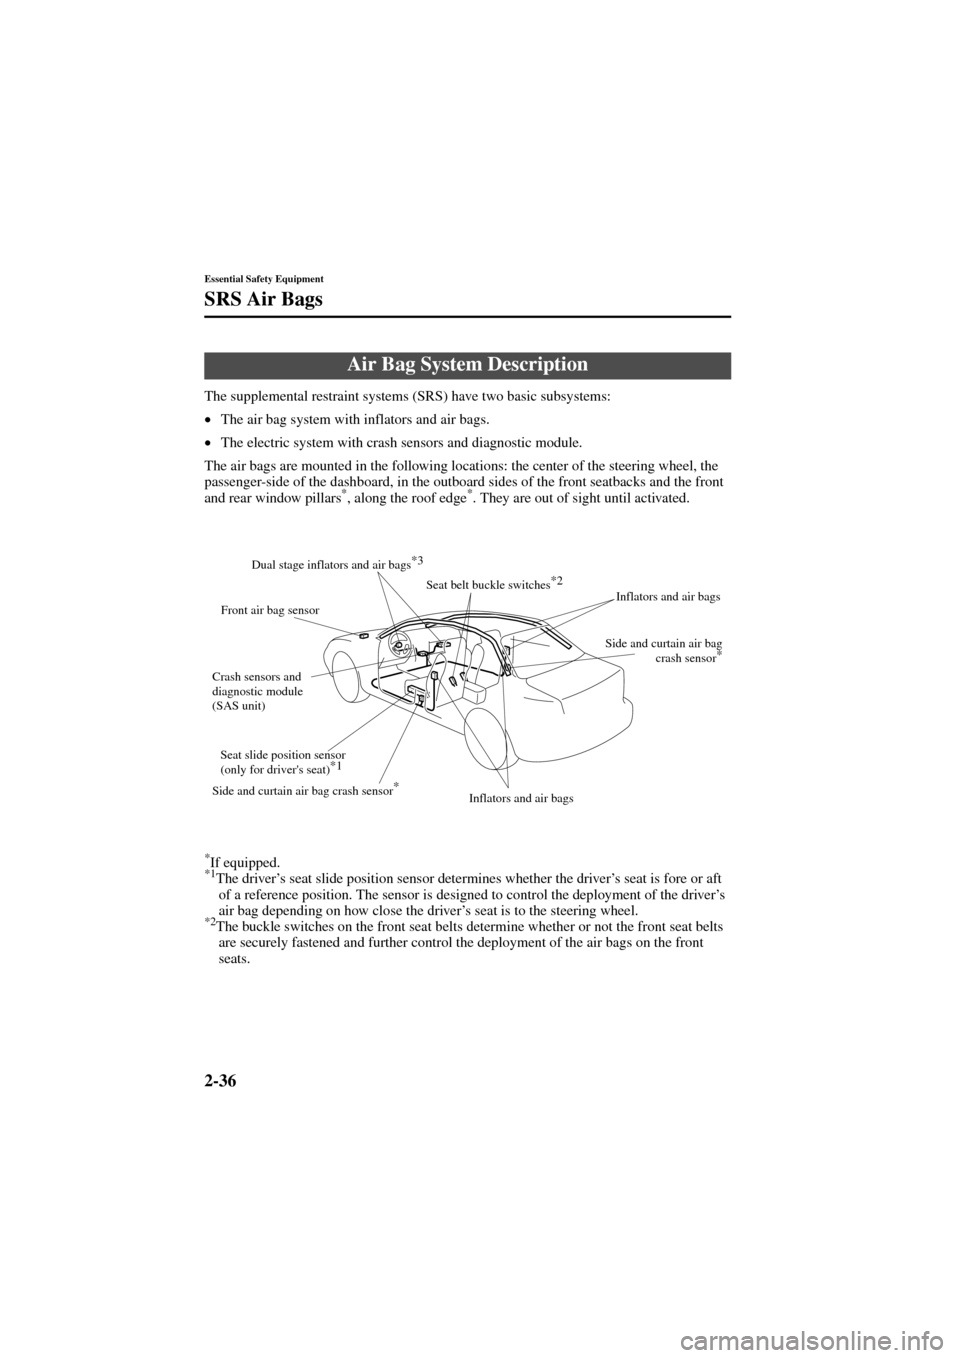 MAZDA MODEL 6 2004   (in English) Workshop Manual 2-36
Essential Safety Equipment
SRS Air Bags
Form No. 8R29-EA-02I
The supplemental restraint systems (SRS) have two basic subsystems:
•
The air bag system with inflators and air bags.
•
The electr